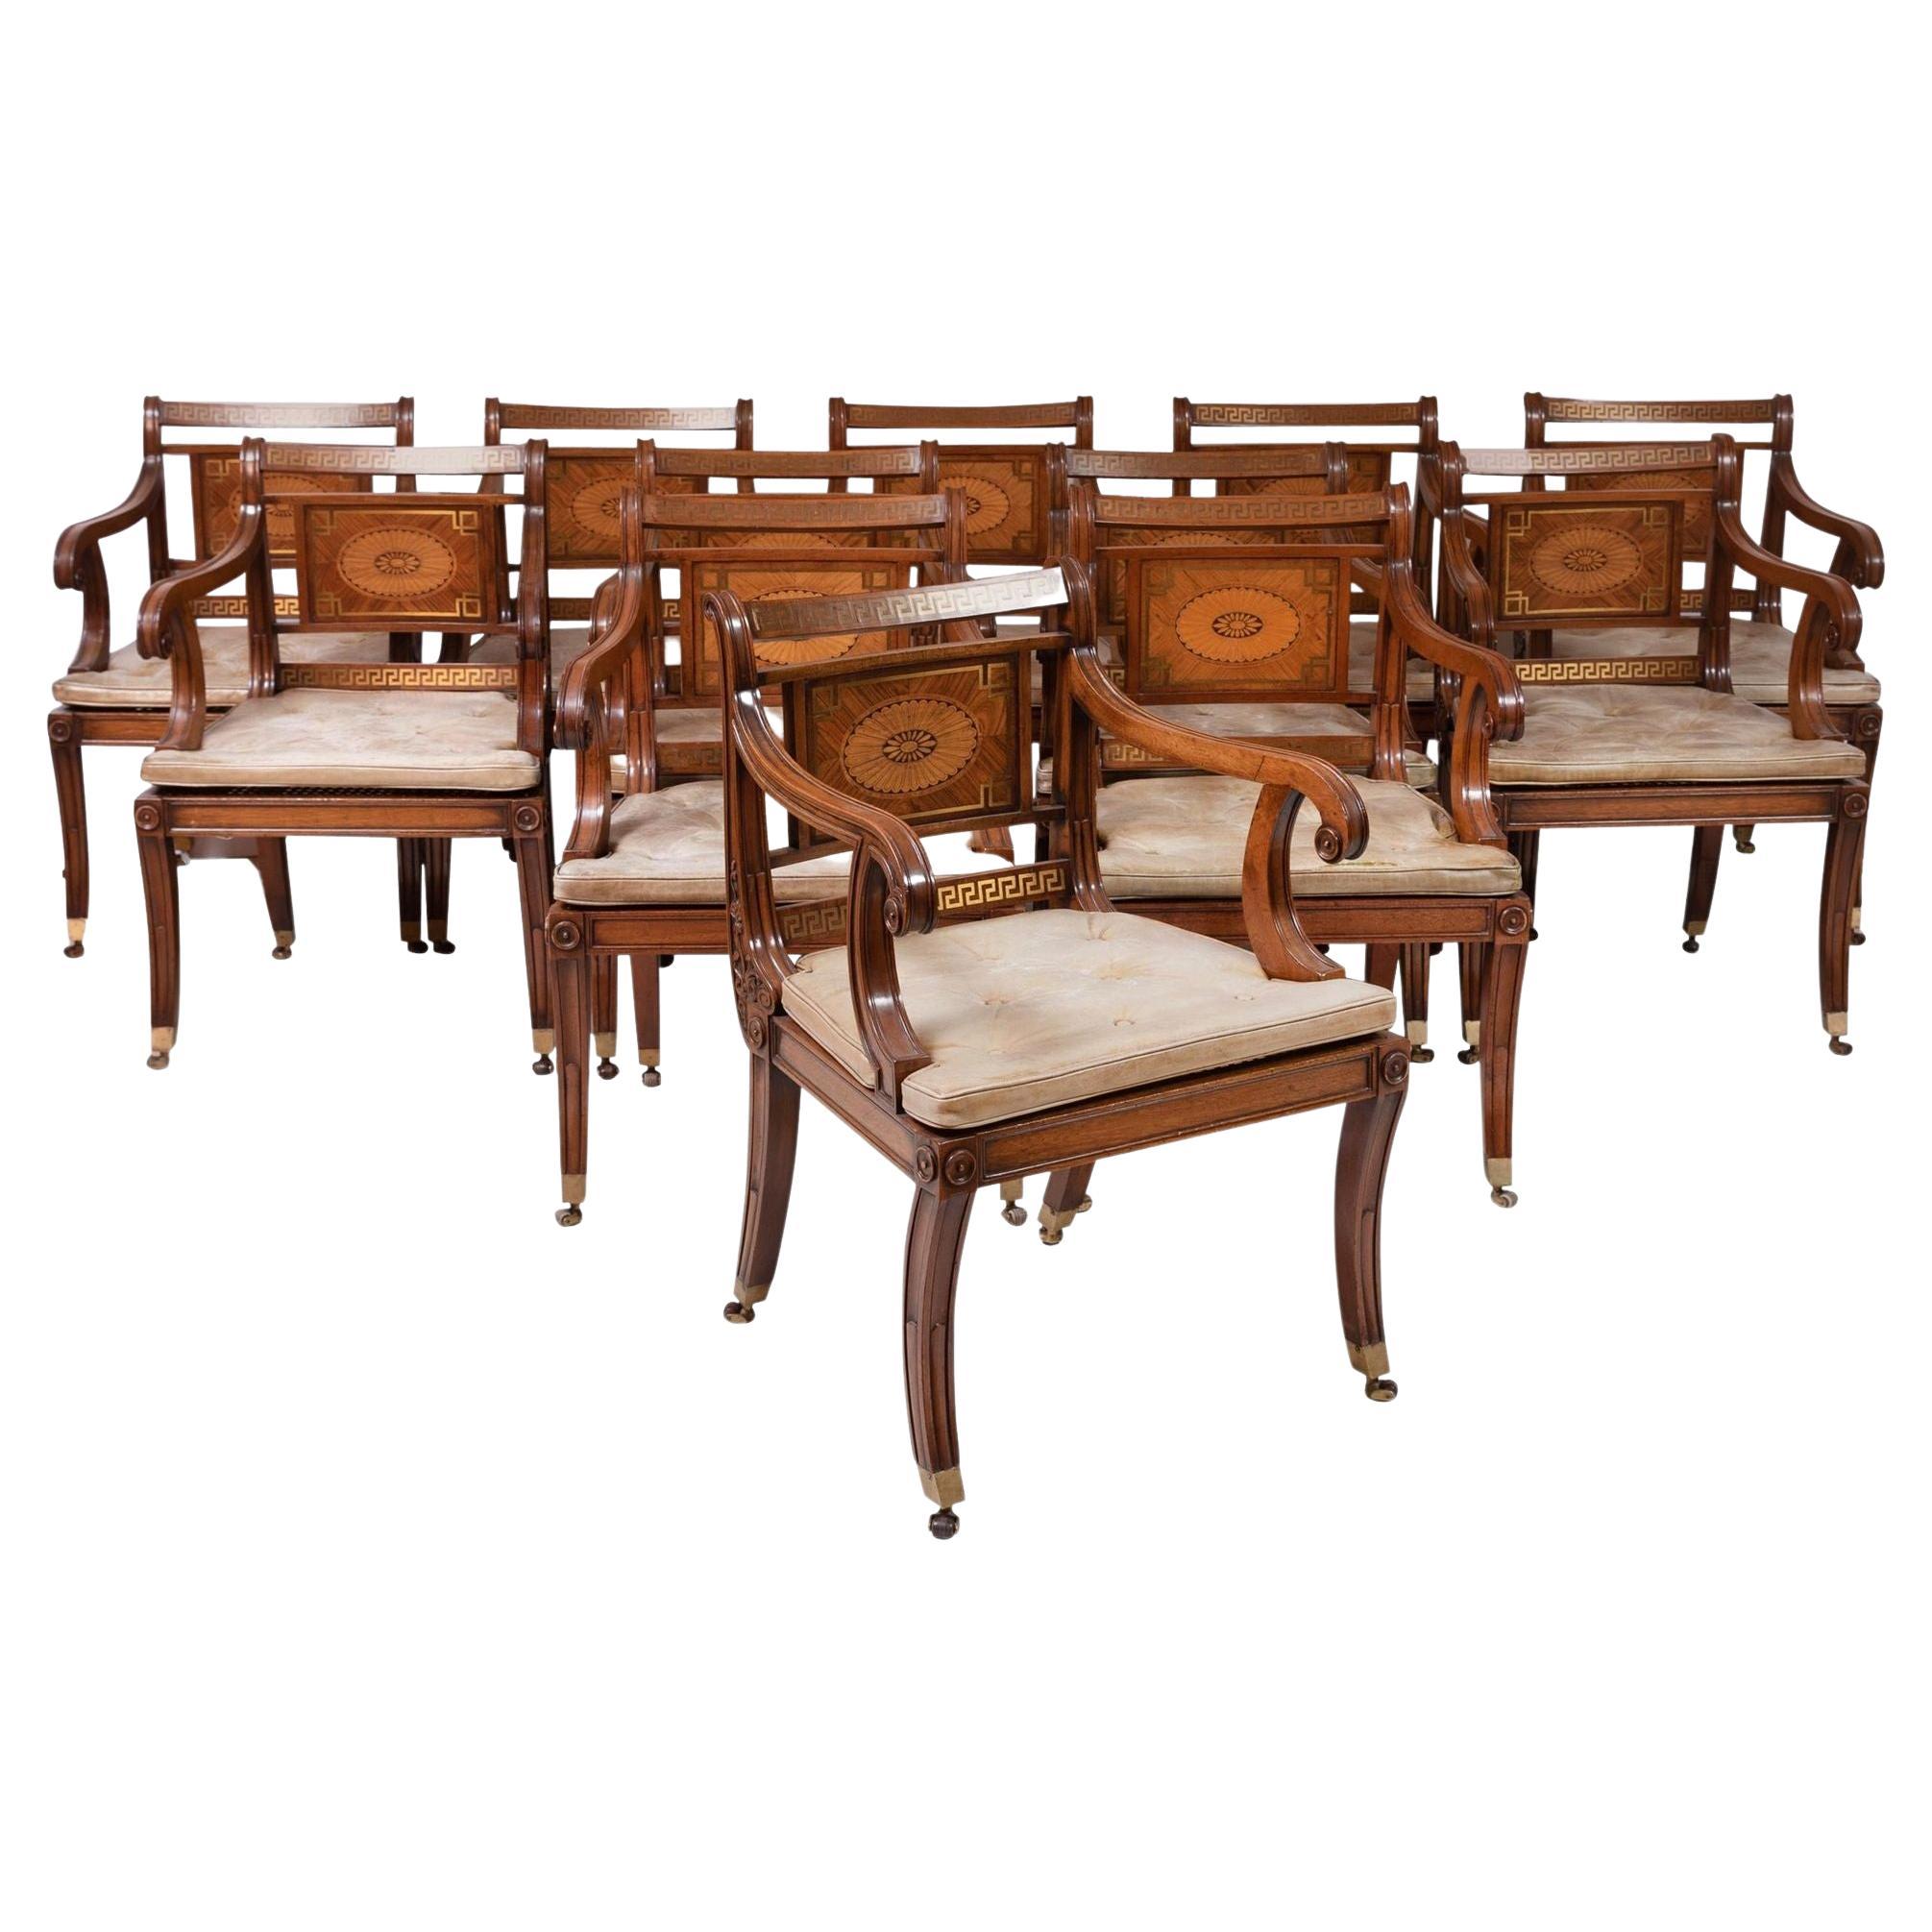 Set of 10 Neoclassical Inlaid Armchairs